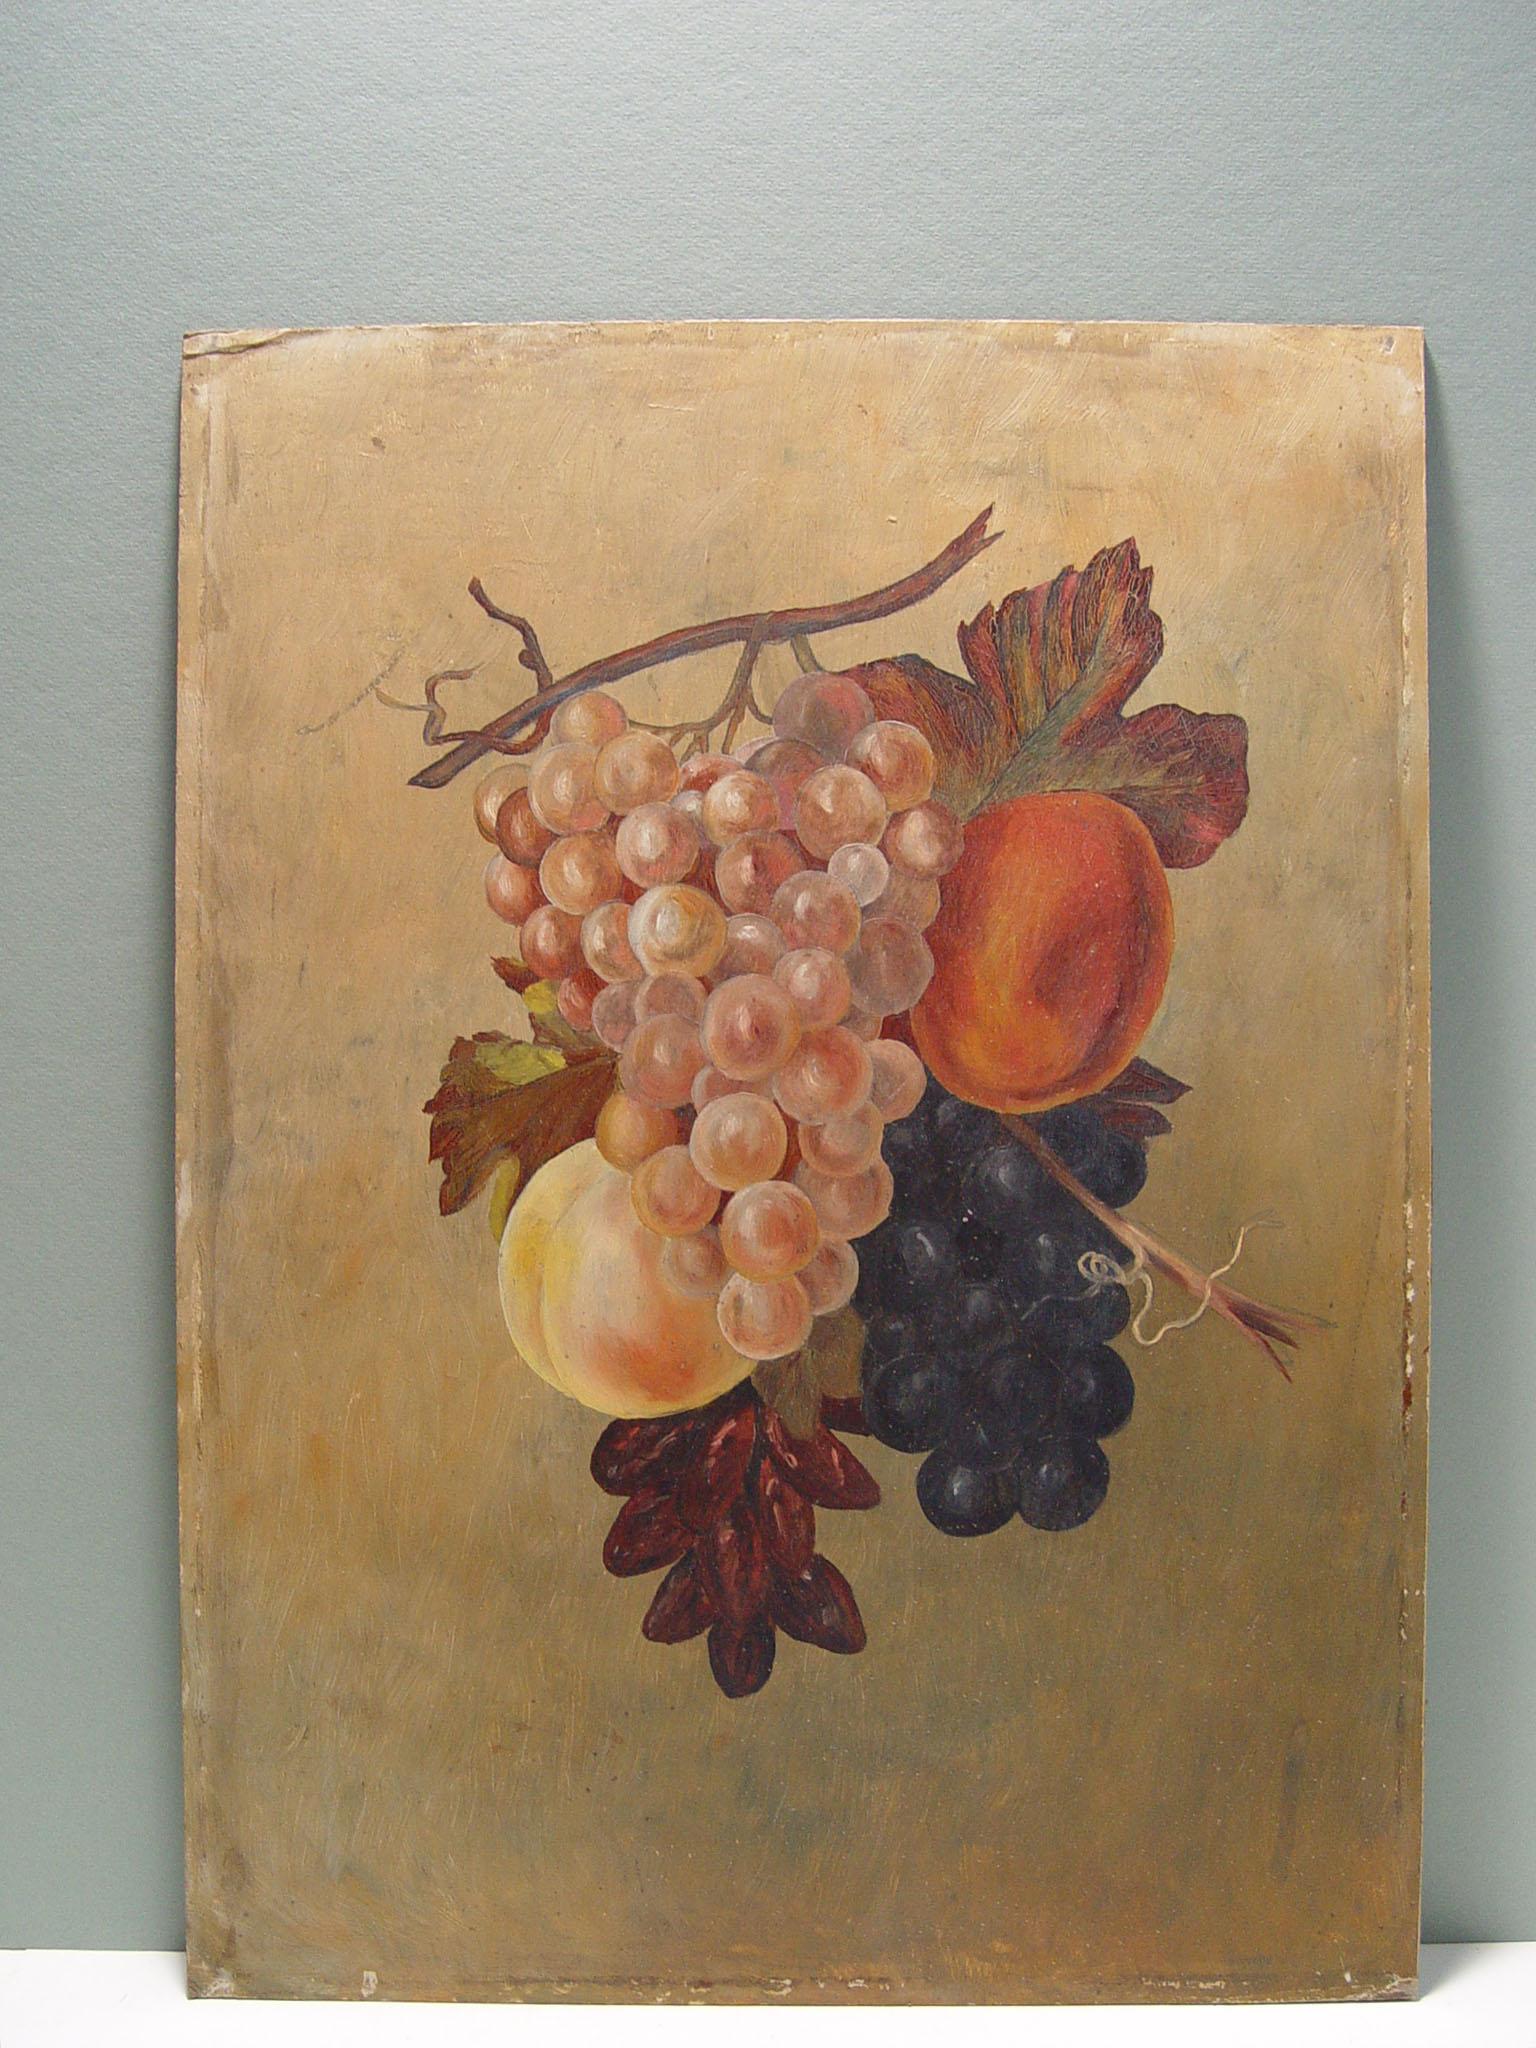 Grapes and peaches still life oil on board, circa 1890. Unsigned. Unframed. Edge wear, age toning.